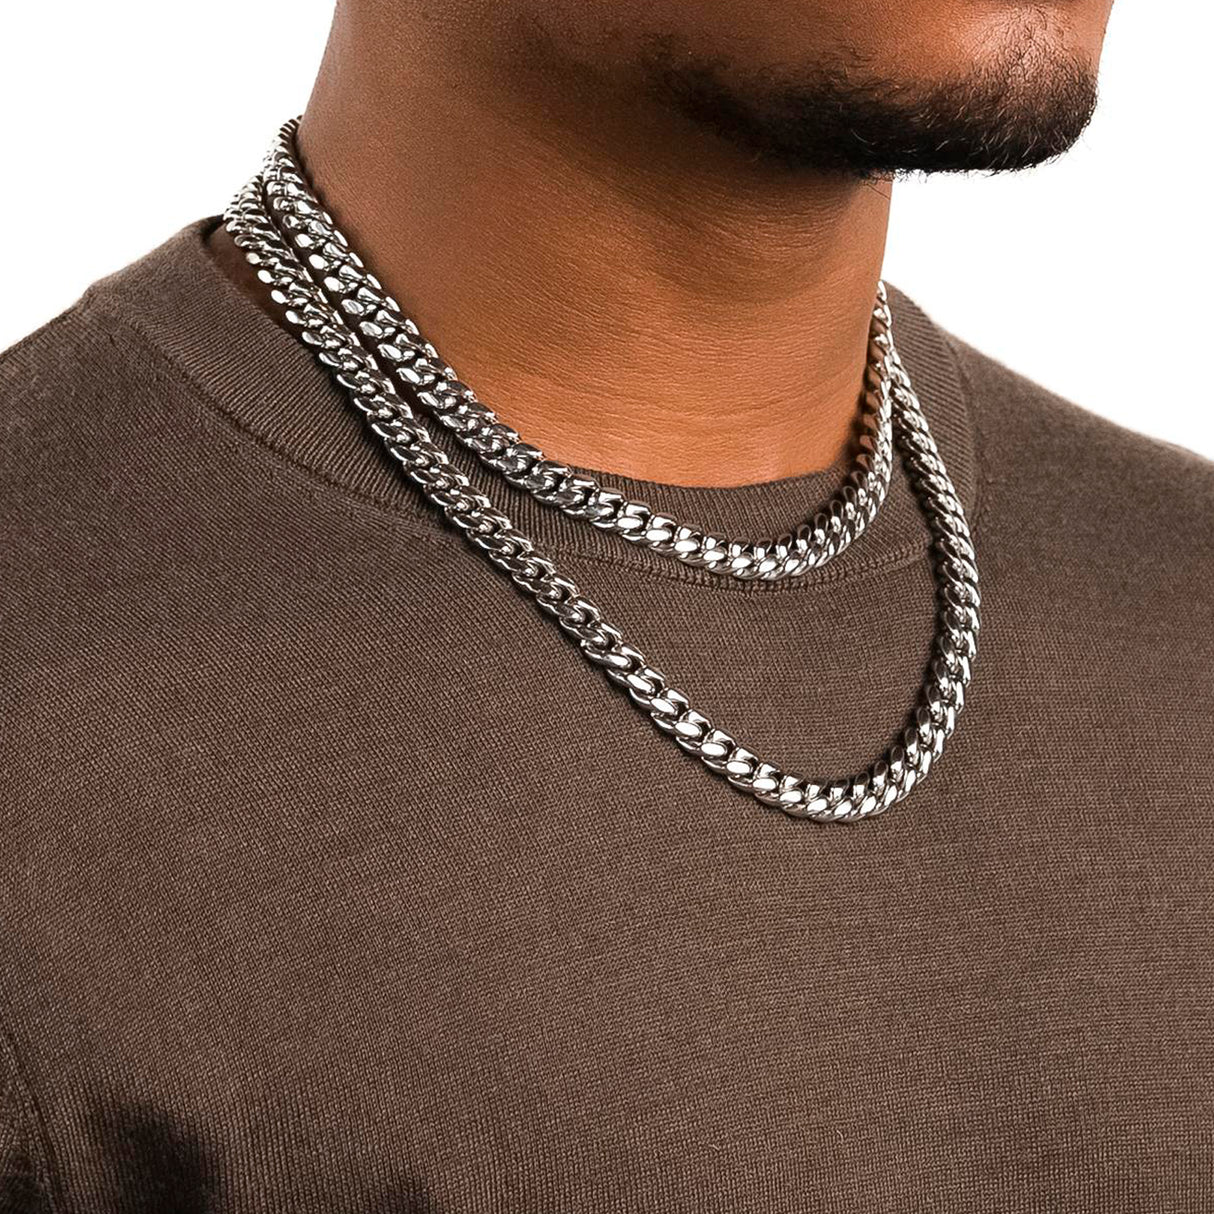 the-gold-gods-mens-jewelry-18k-white-gold-plated-miami-cuban-link-necklace-10mm-dual-chains